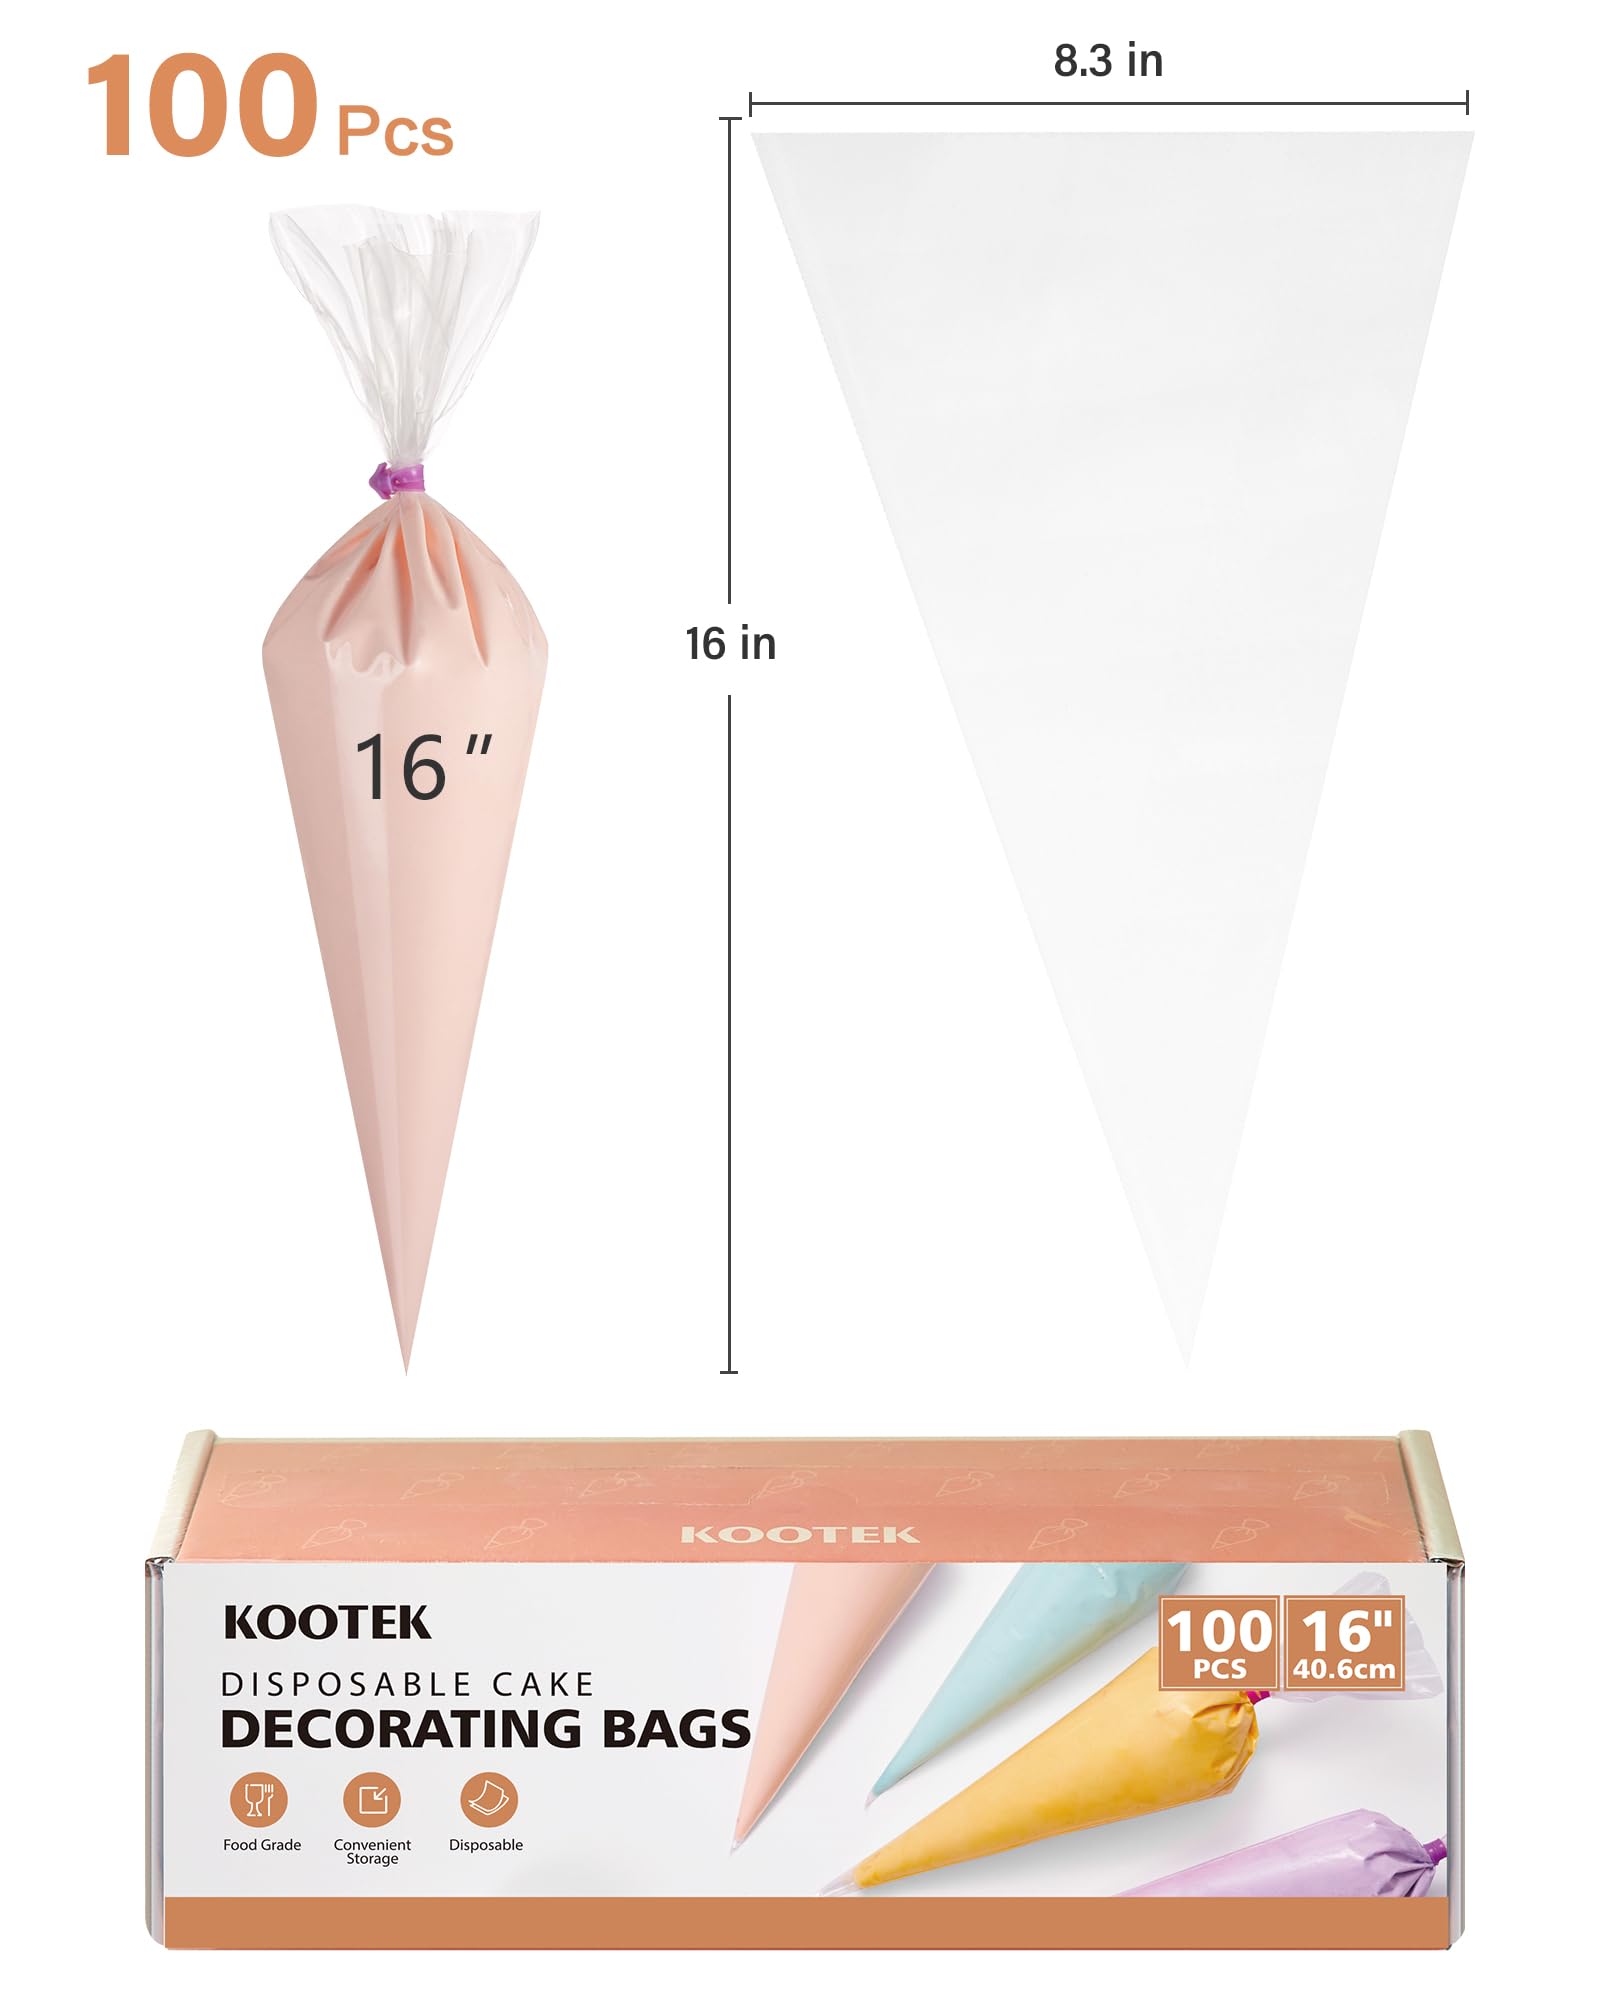 Kootek 16" Piping Bags (100Pcs), Disposable Pastry Bags Anti Burst Icing Frosting Bag Thick Cake Decorating Bags for Cookie, Cupcake, Candy, Baking Supplies Tools